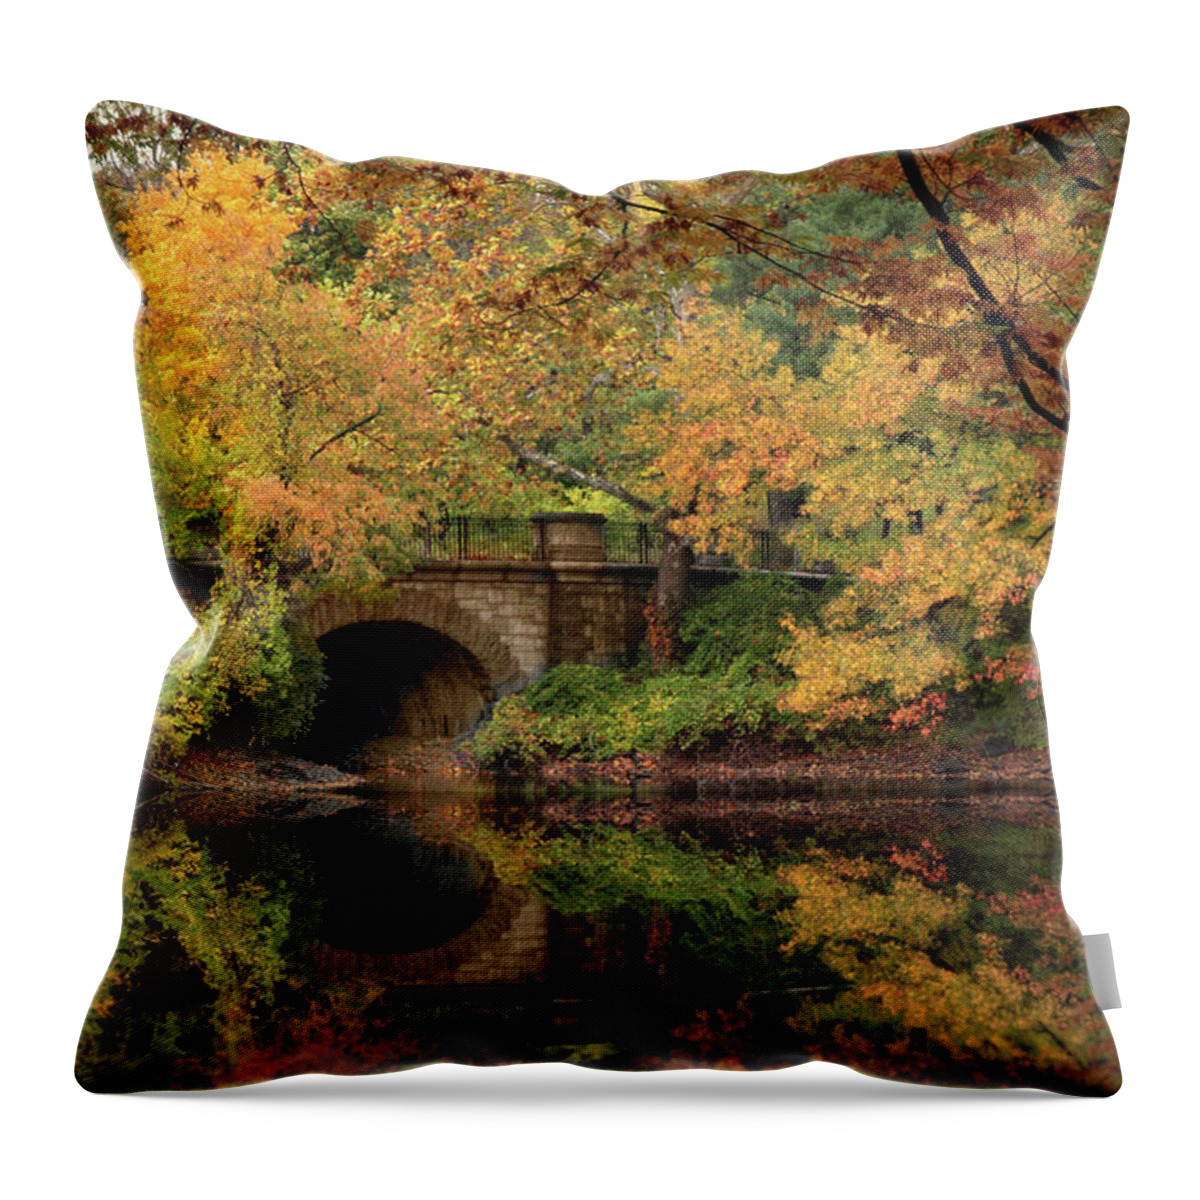 Autumn Throw Pillow featuring the photograph Twin Lake Bridge by Jessica Jenney